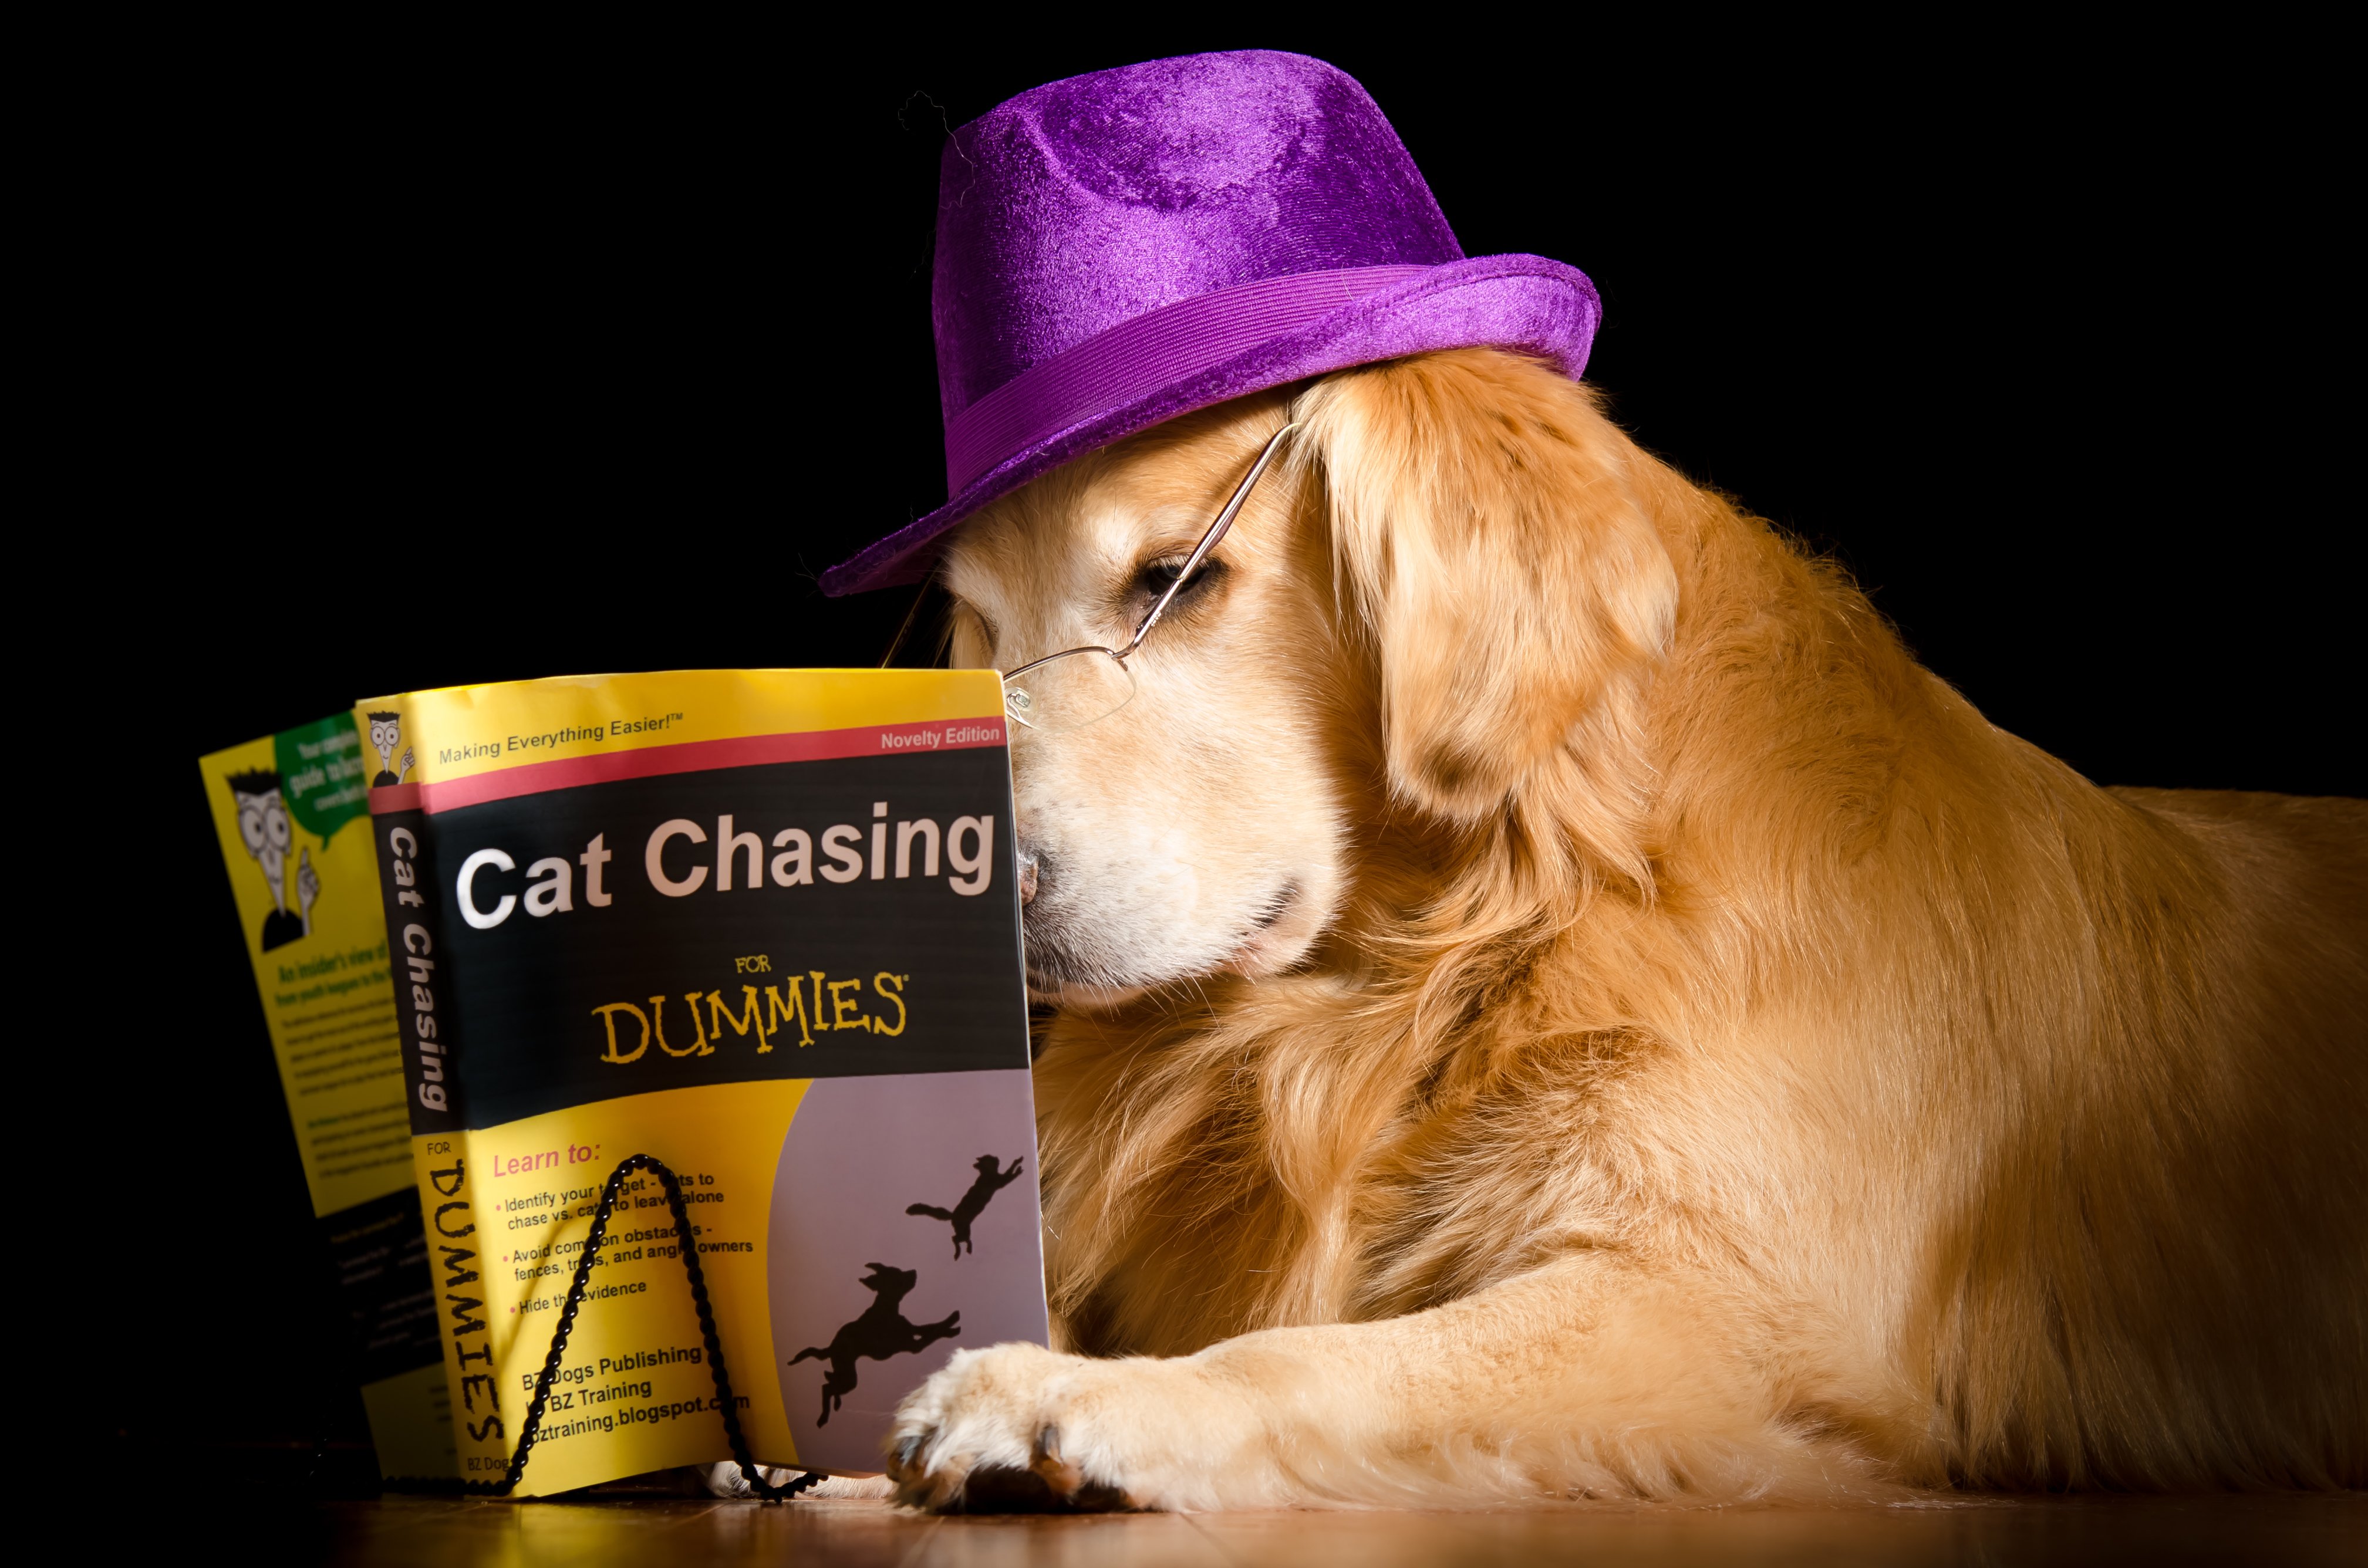 dogs, Retriever, Book, Hat, Black, Background, Animals, Humor, Wallpapers Wallpaper